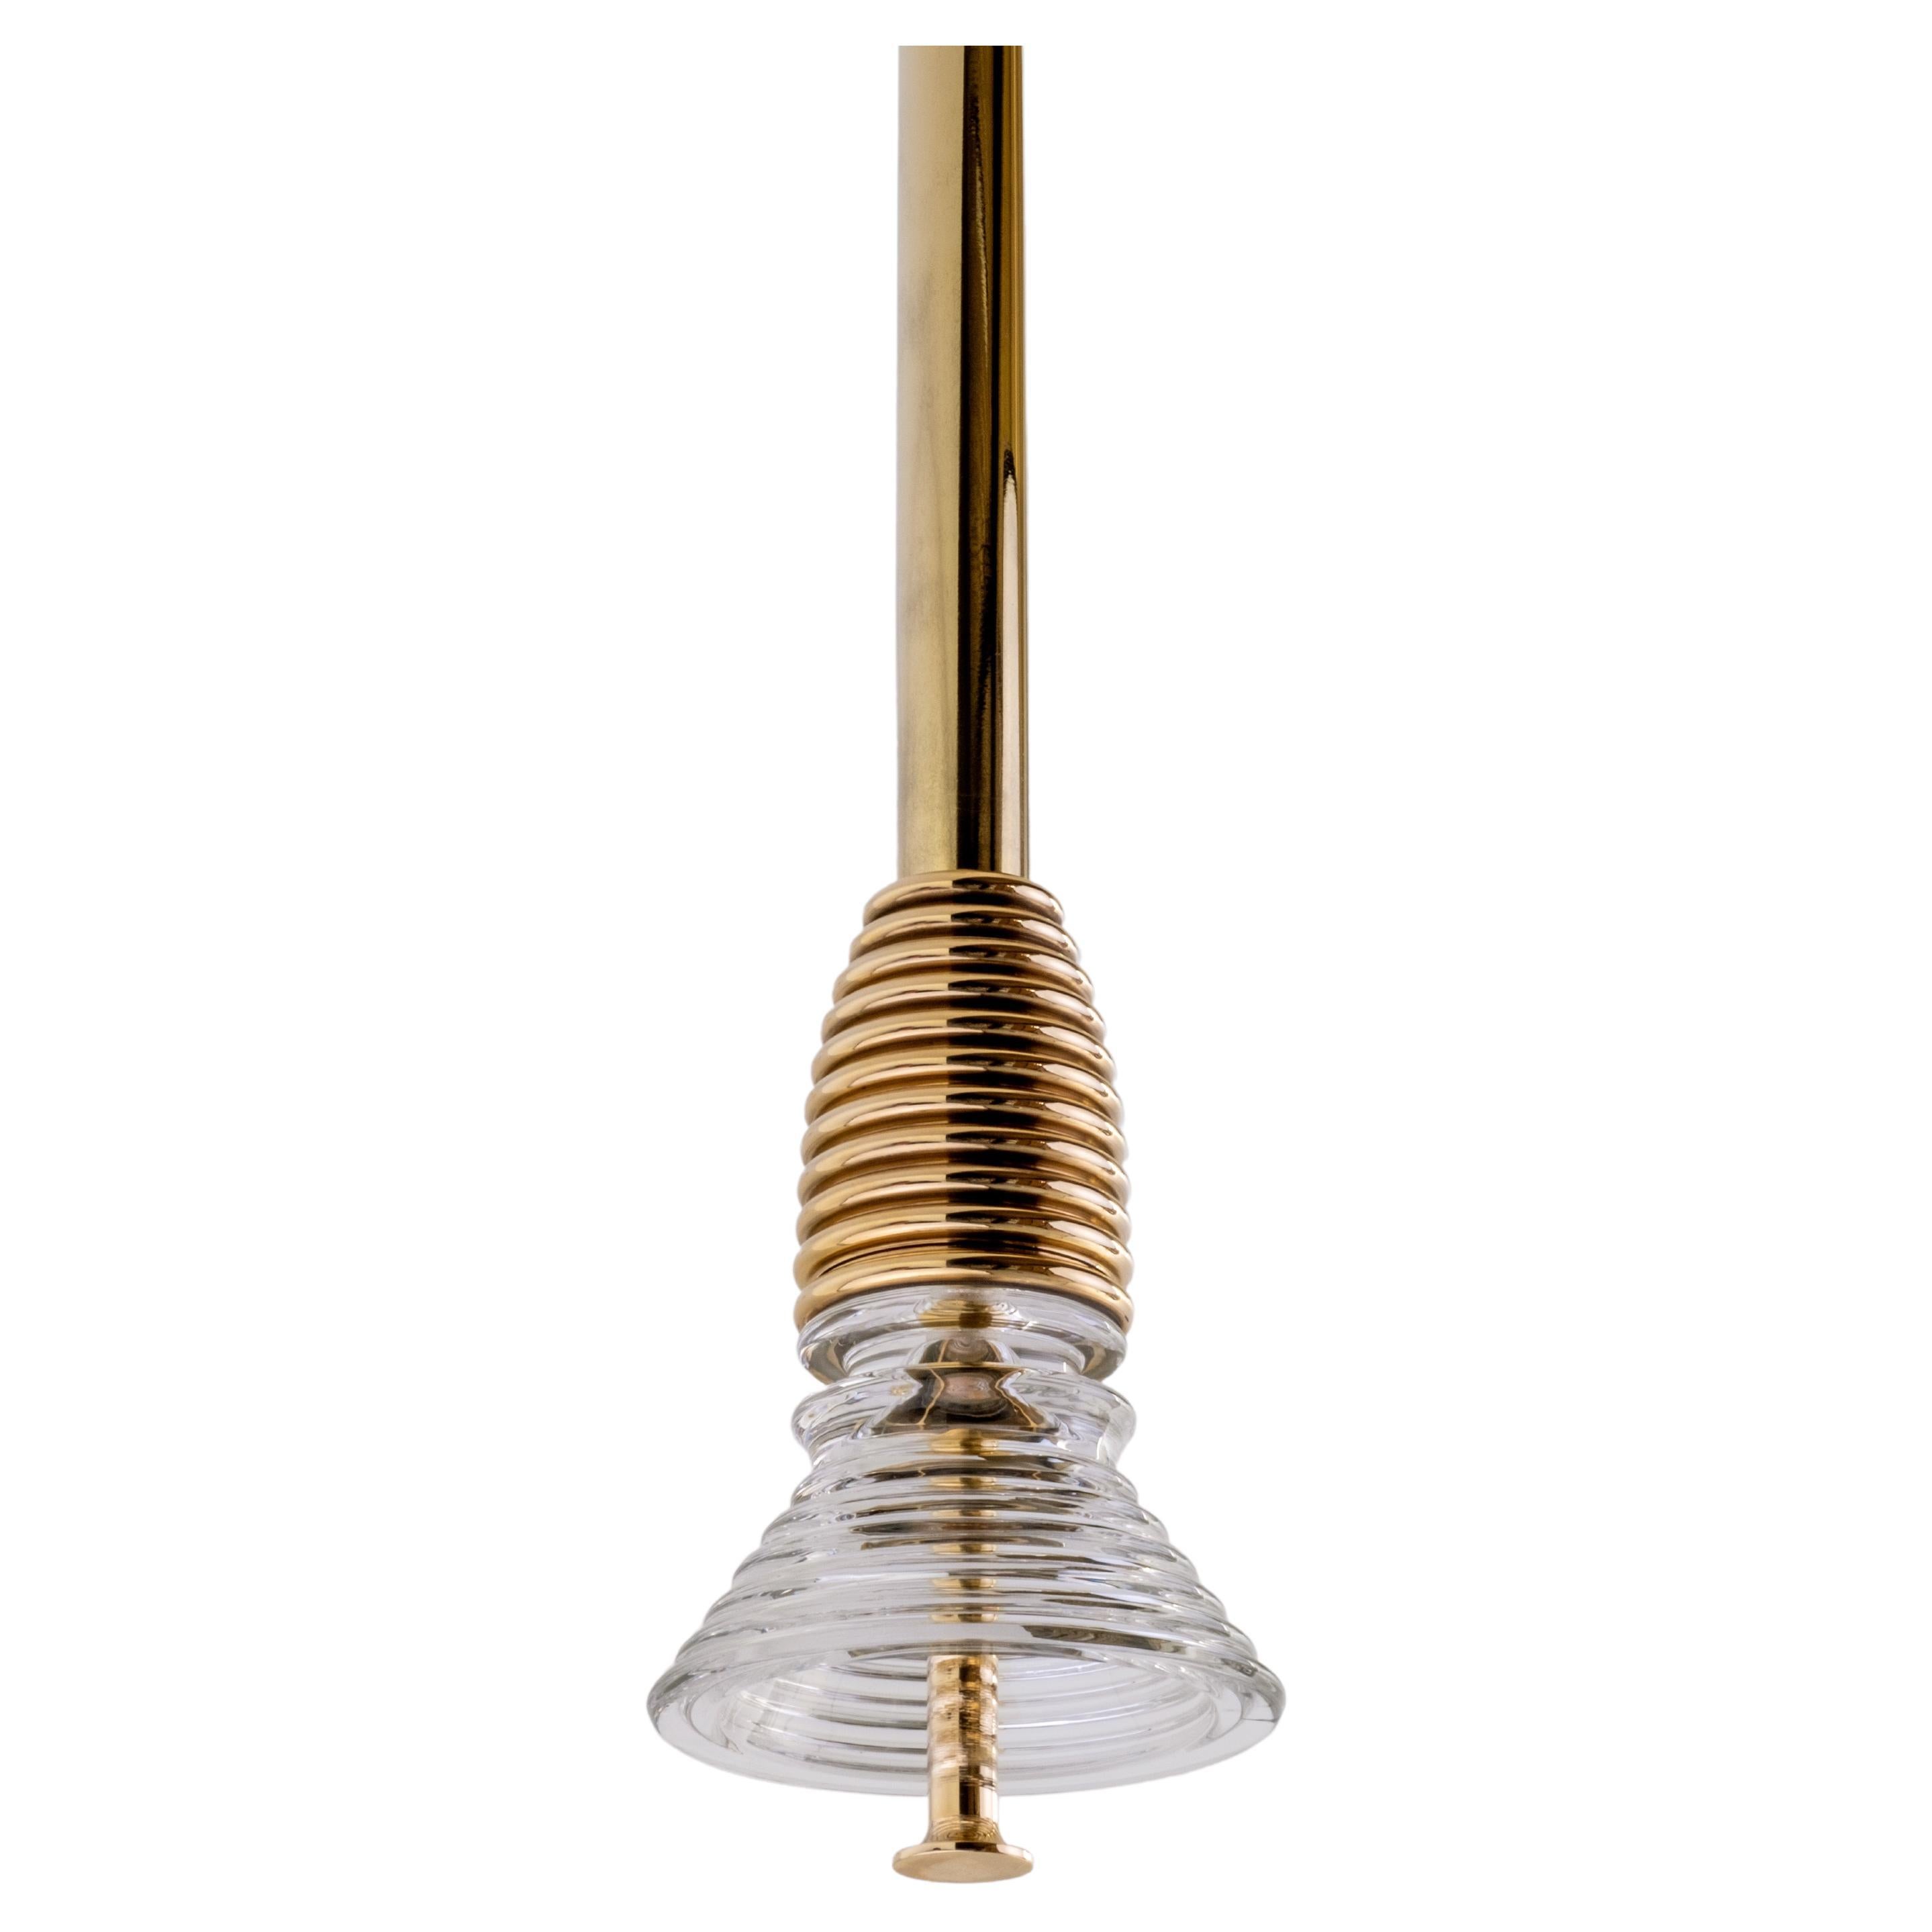 The Insulator 'A' Pendant in polished brass and clear glass by NOVOCASTRIAN deco